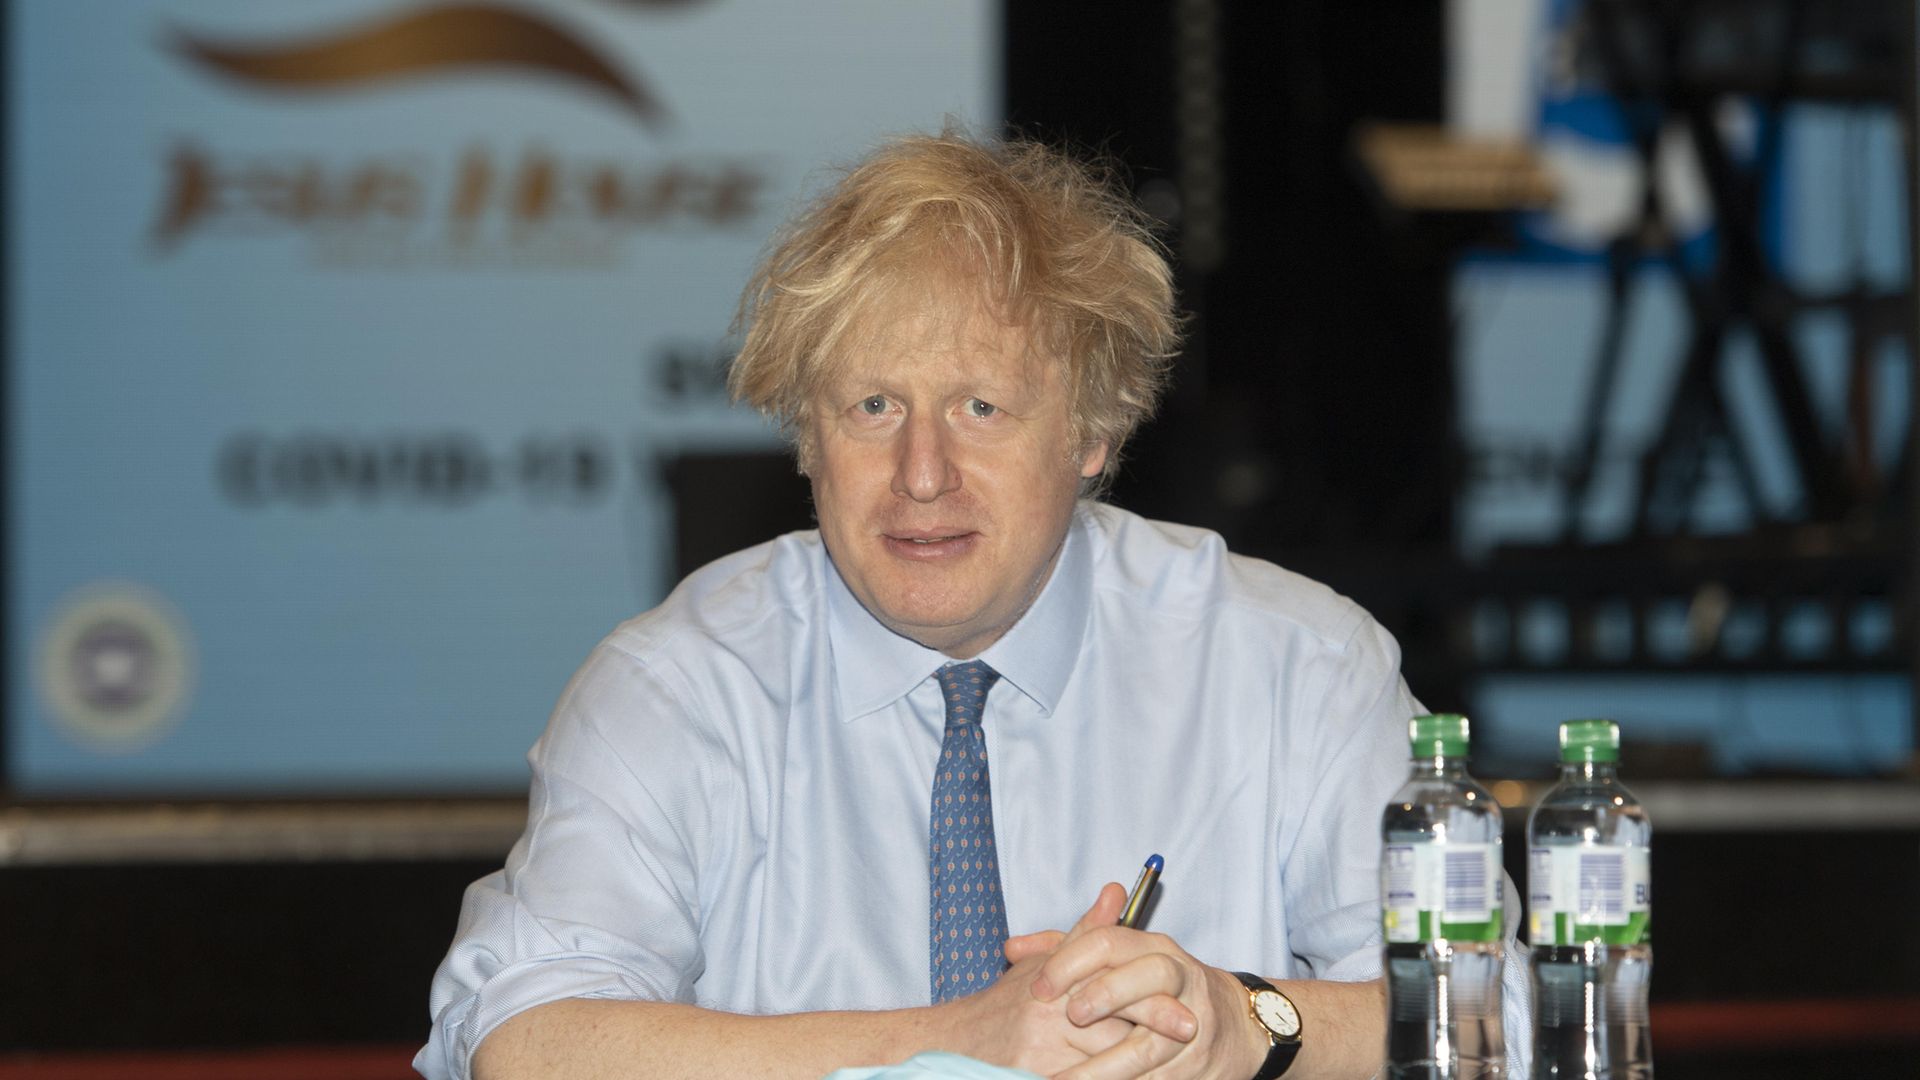 Prime Minister Boris Johnson talks to church leaders during a visit to a vaccination centre - Credit: PA